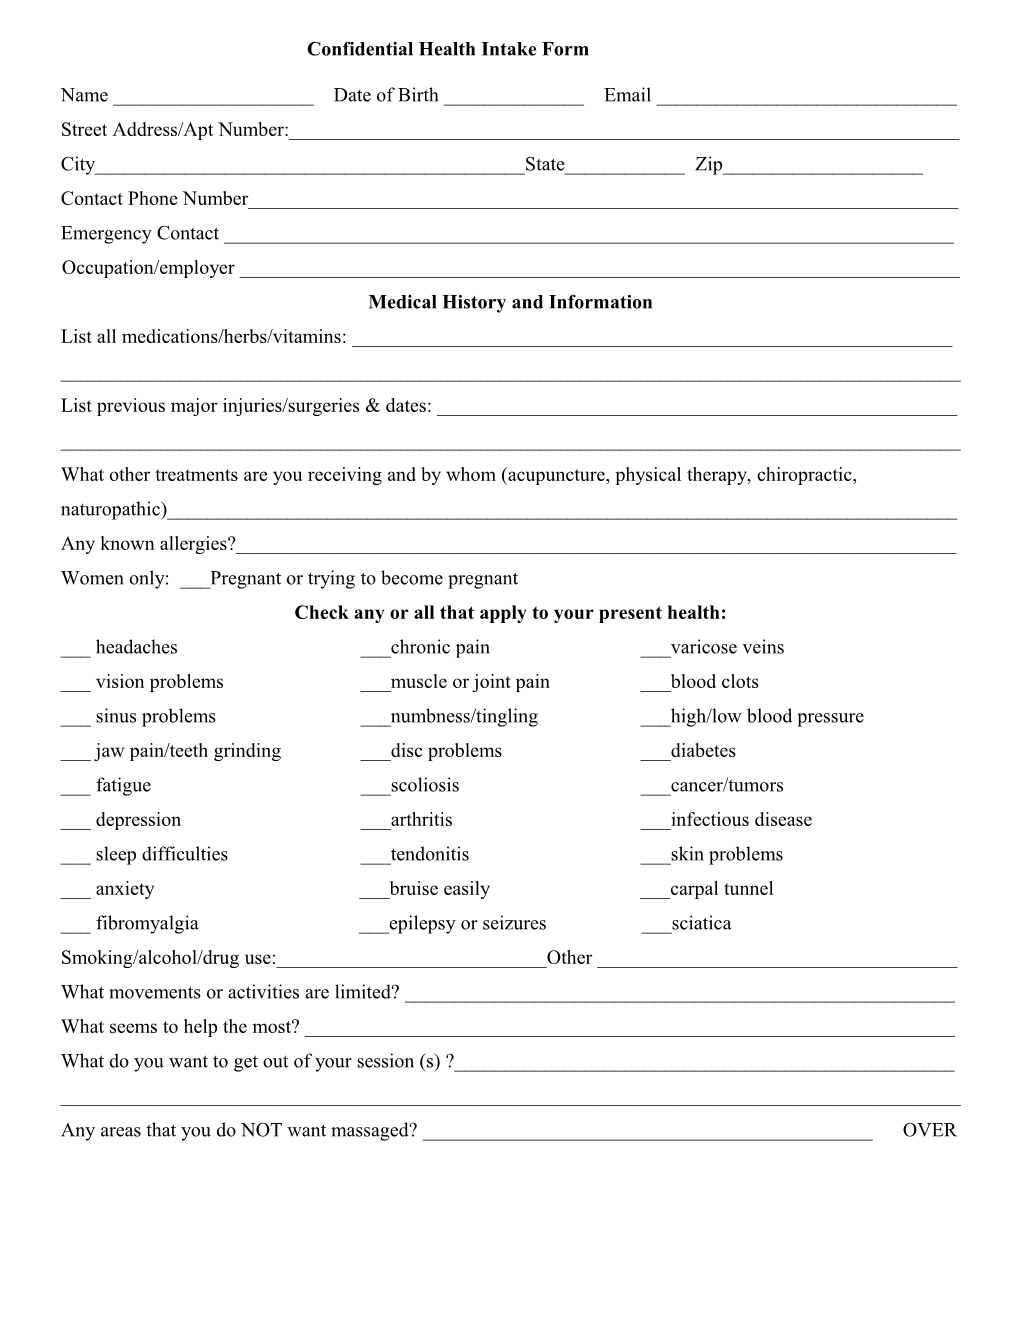 Forms: Confidential Health Intake Form